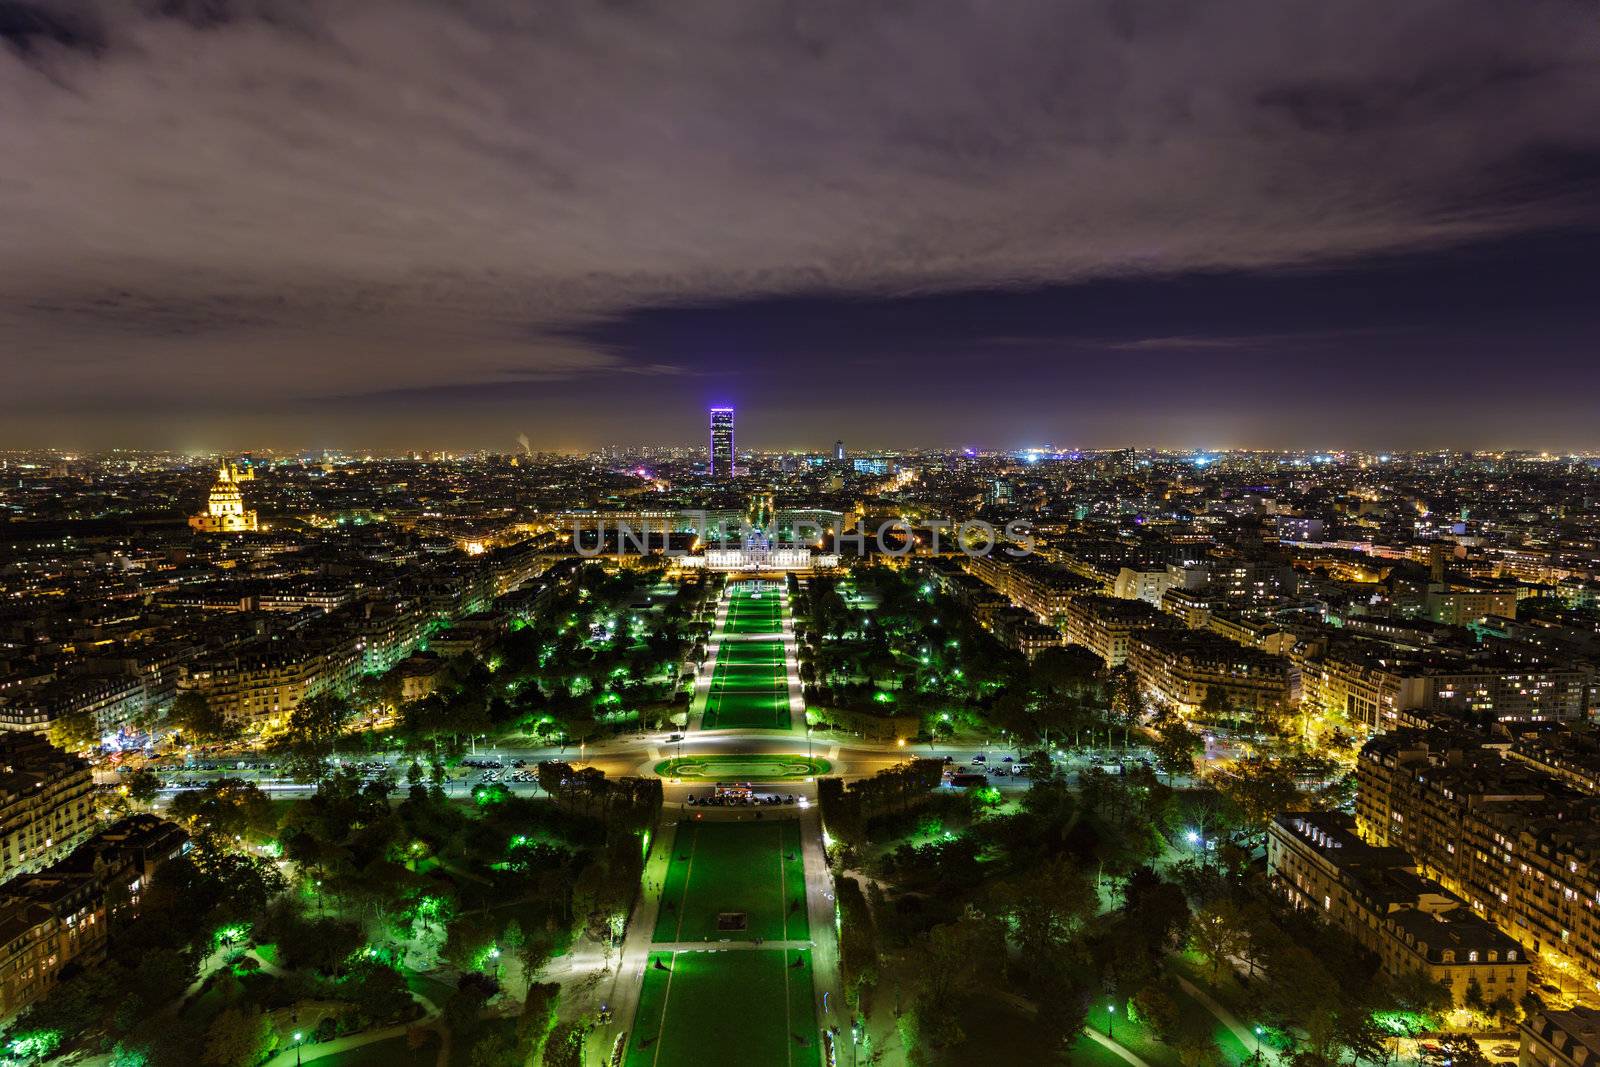 Night view from the Eiffel Tower by Roka